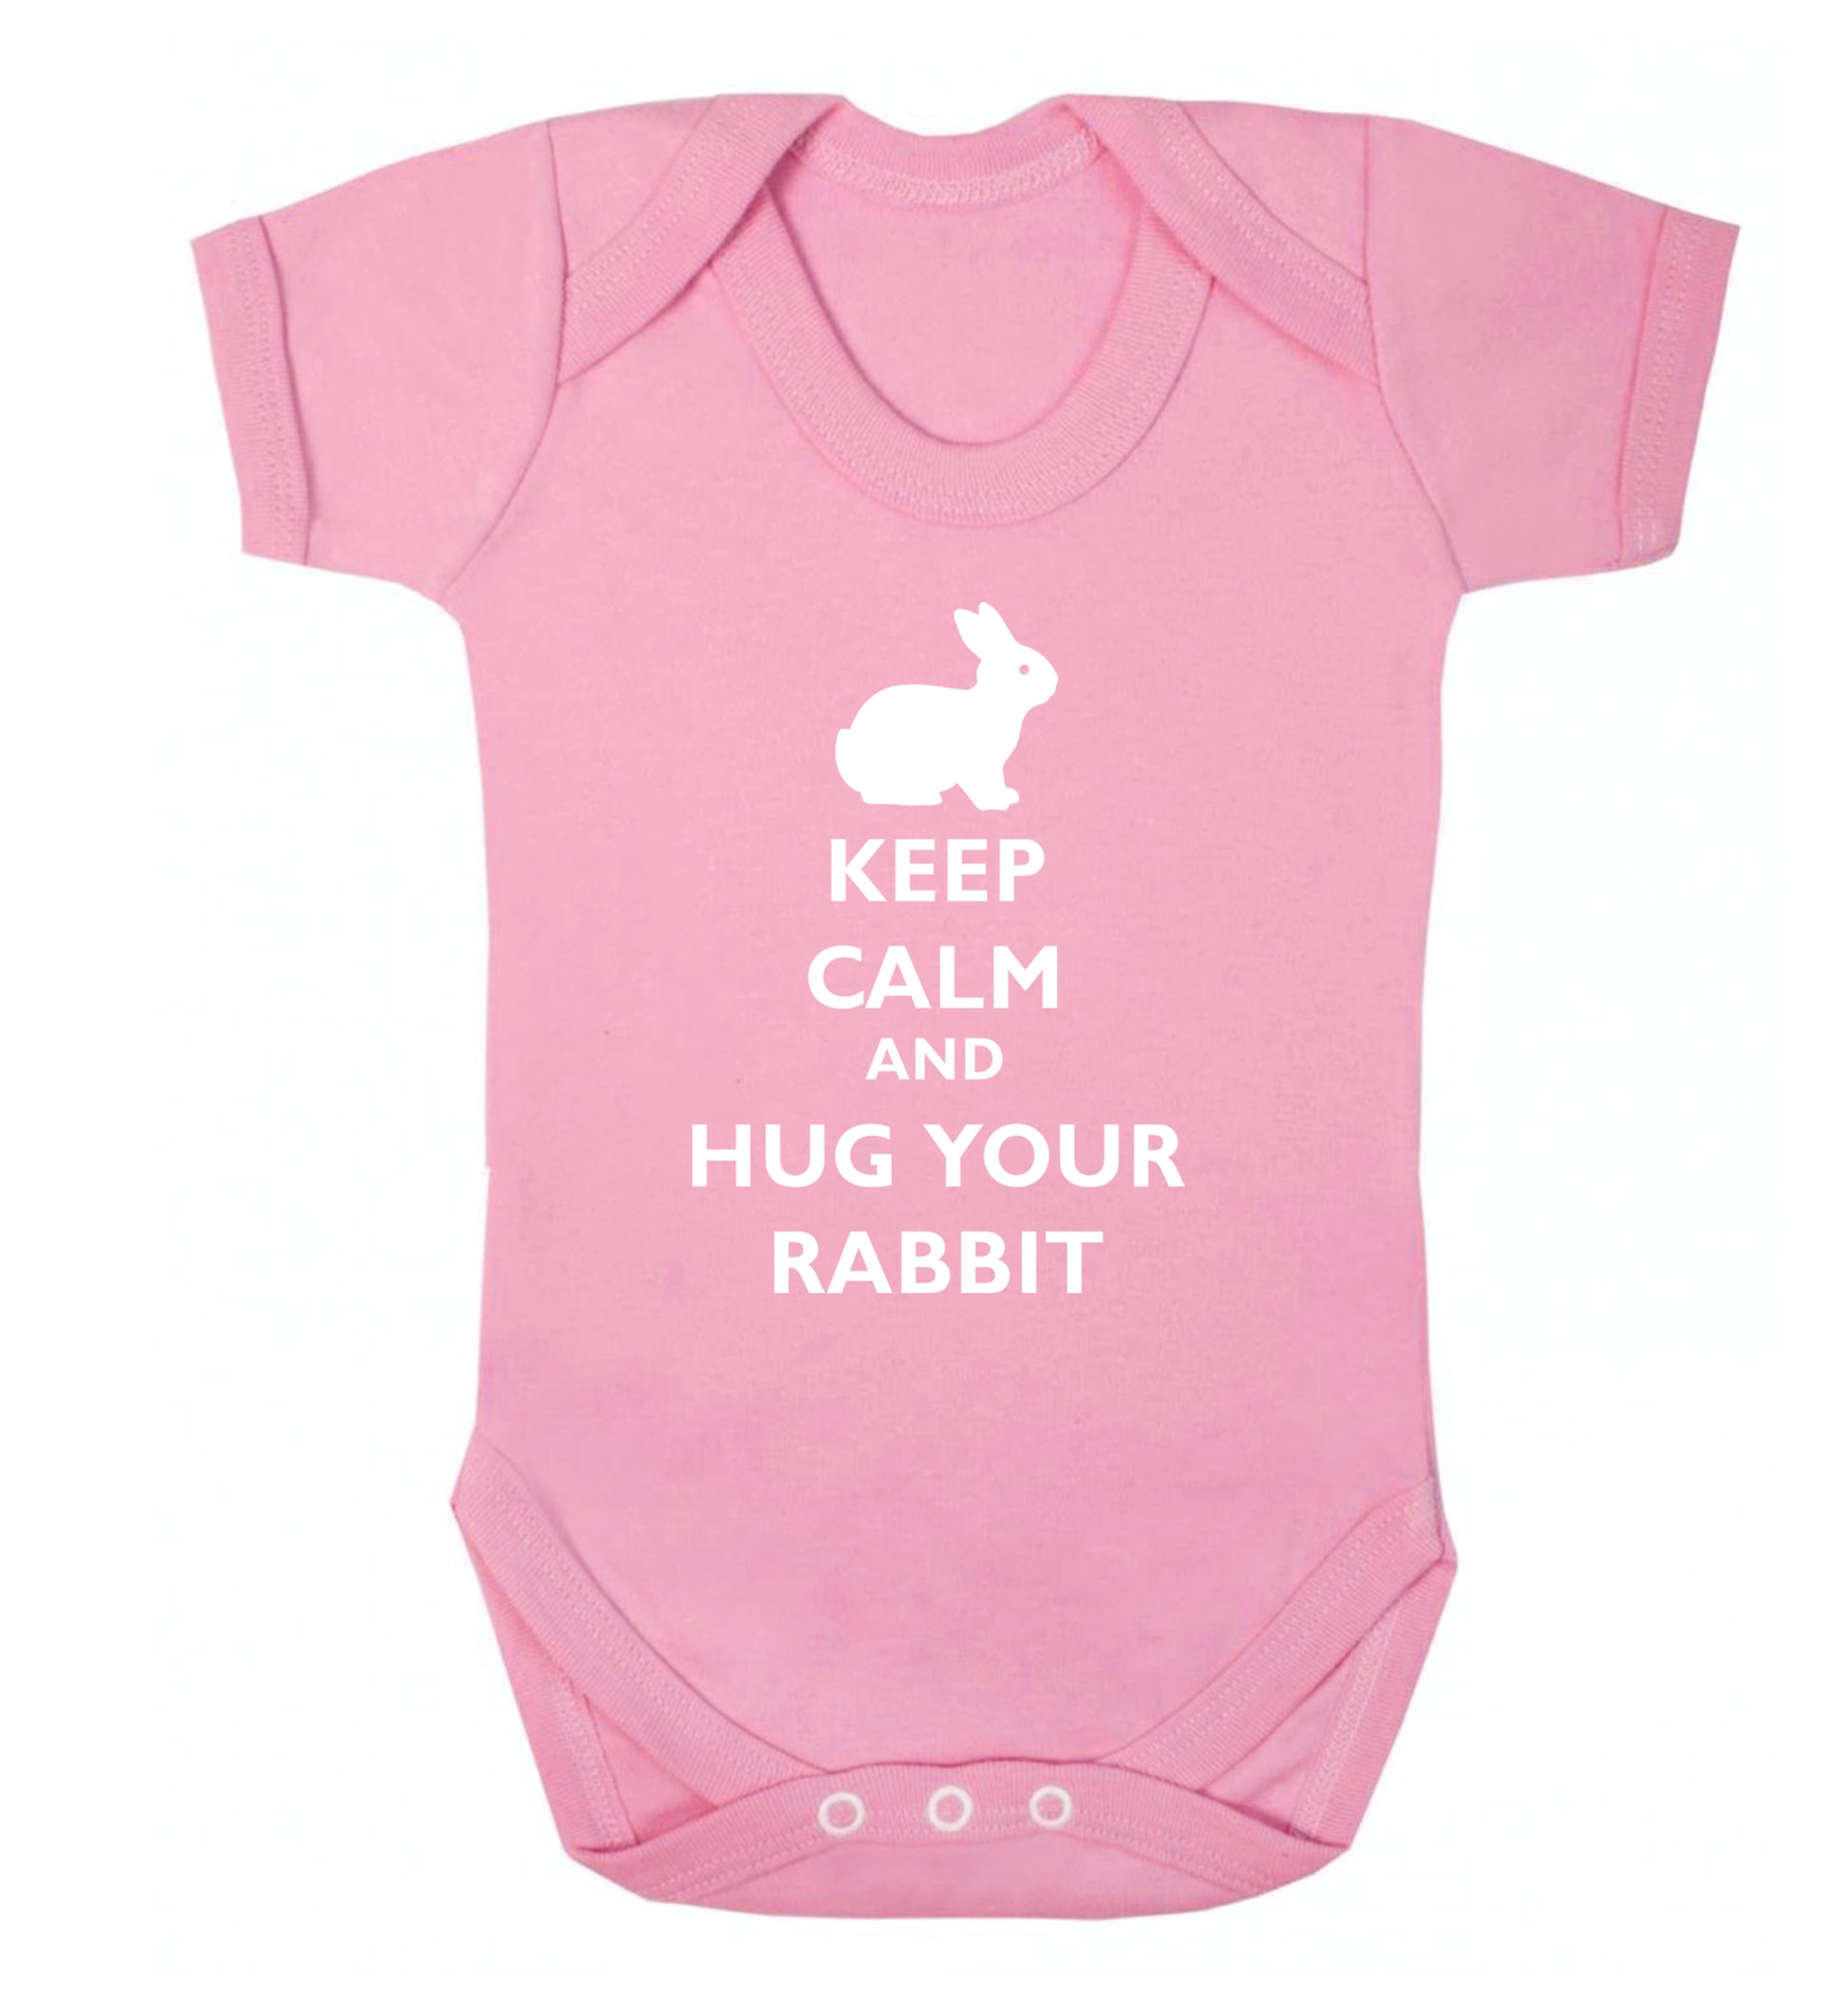 Keep calm and hug your rabbit Baby Vest pale pink 18-24 months